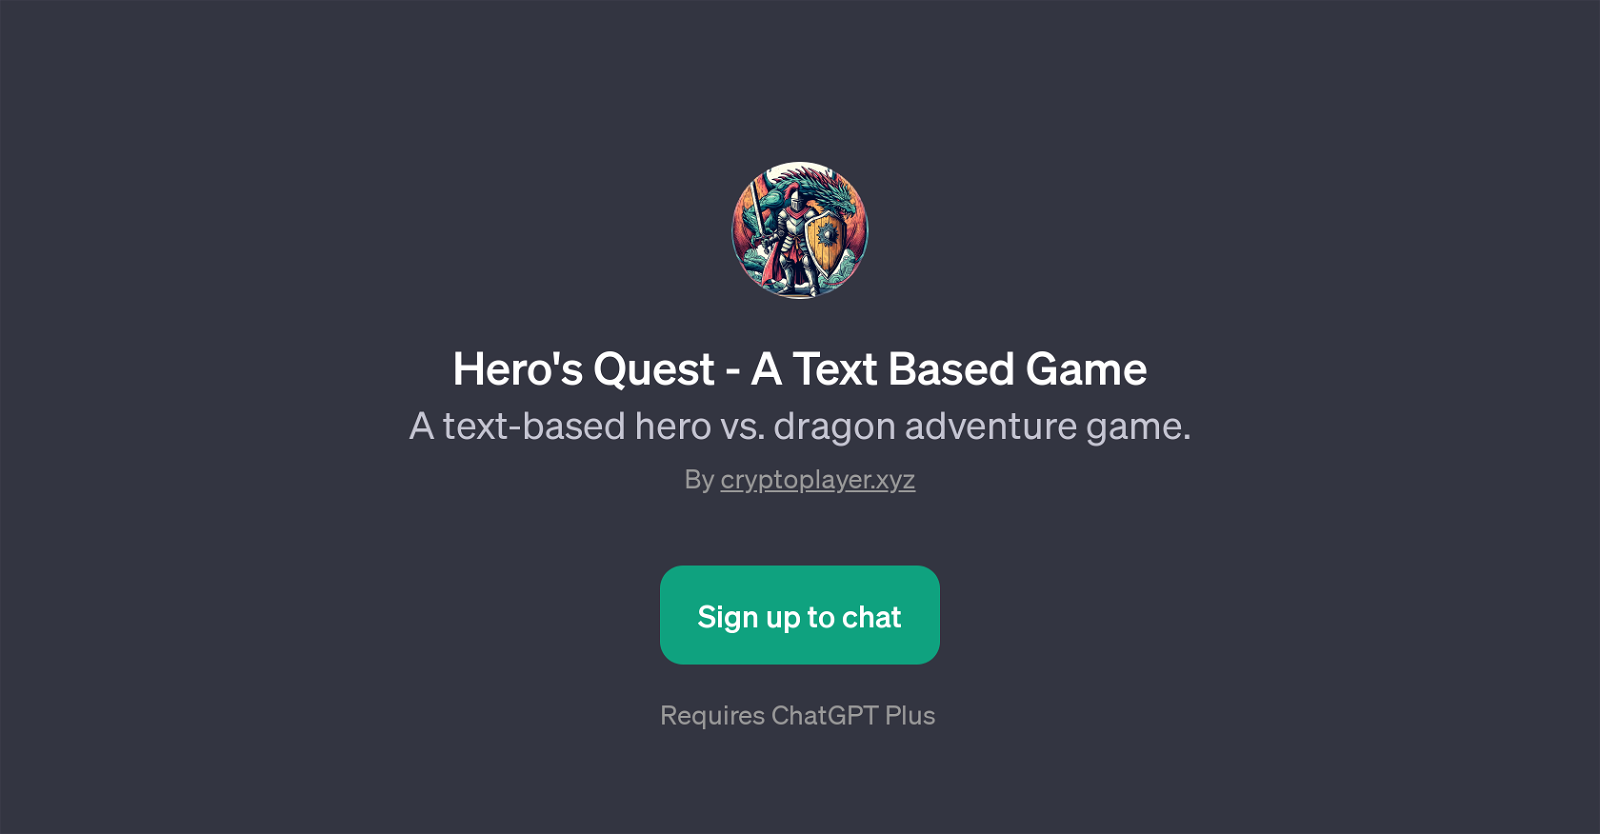 Hero's Quest - A Text Based Game website